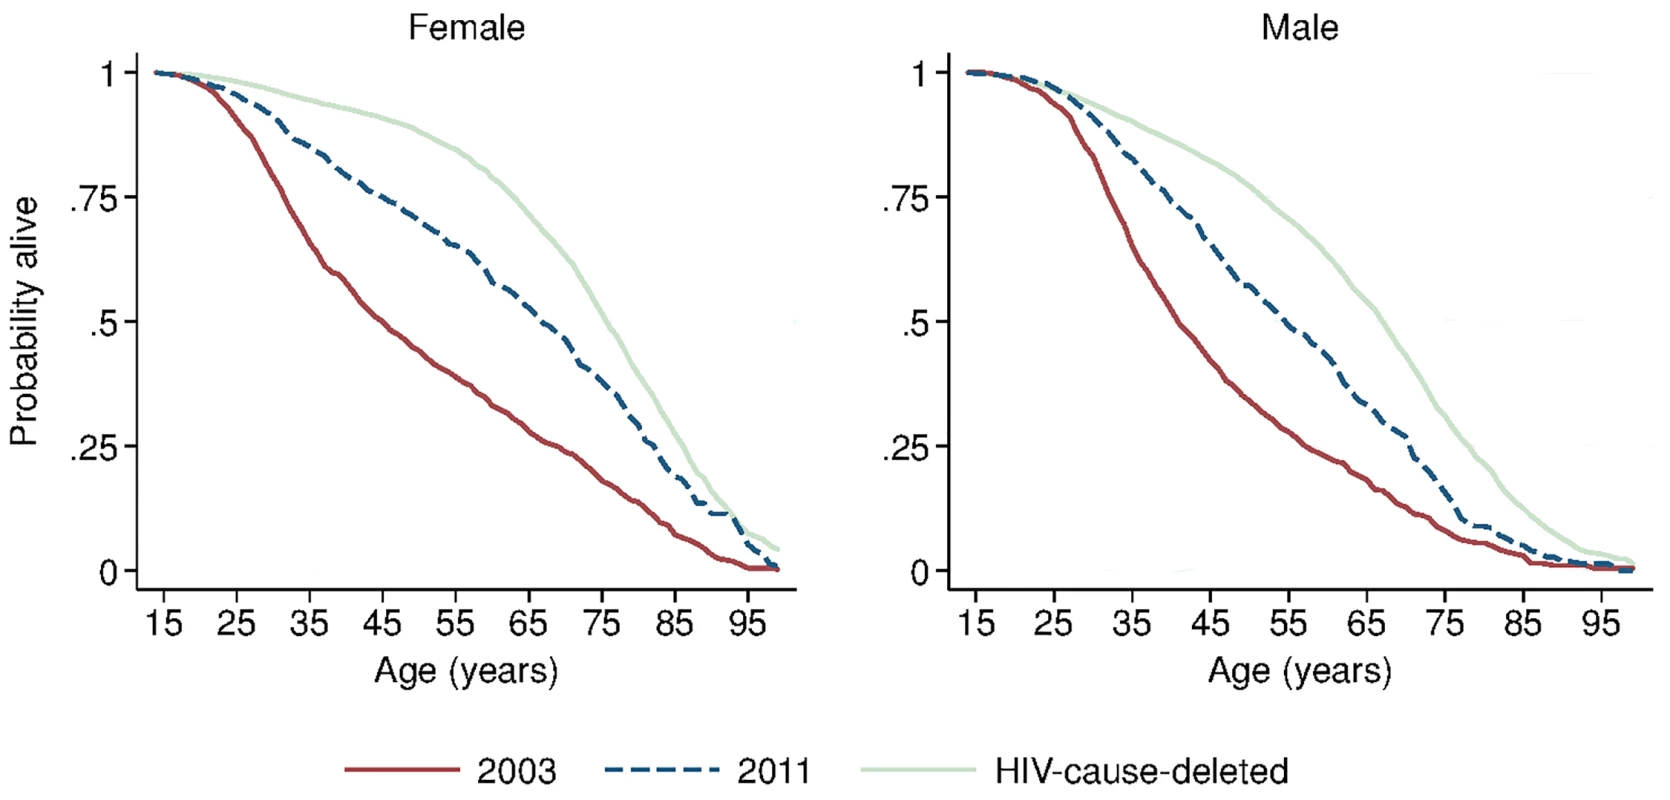 Sex-specific survival curves: 2003, 2011, and HIV-cause-deleted.